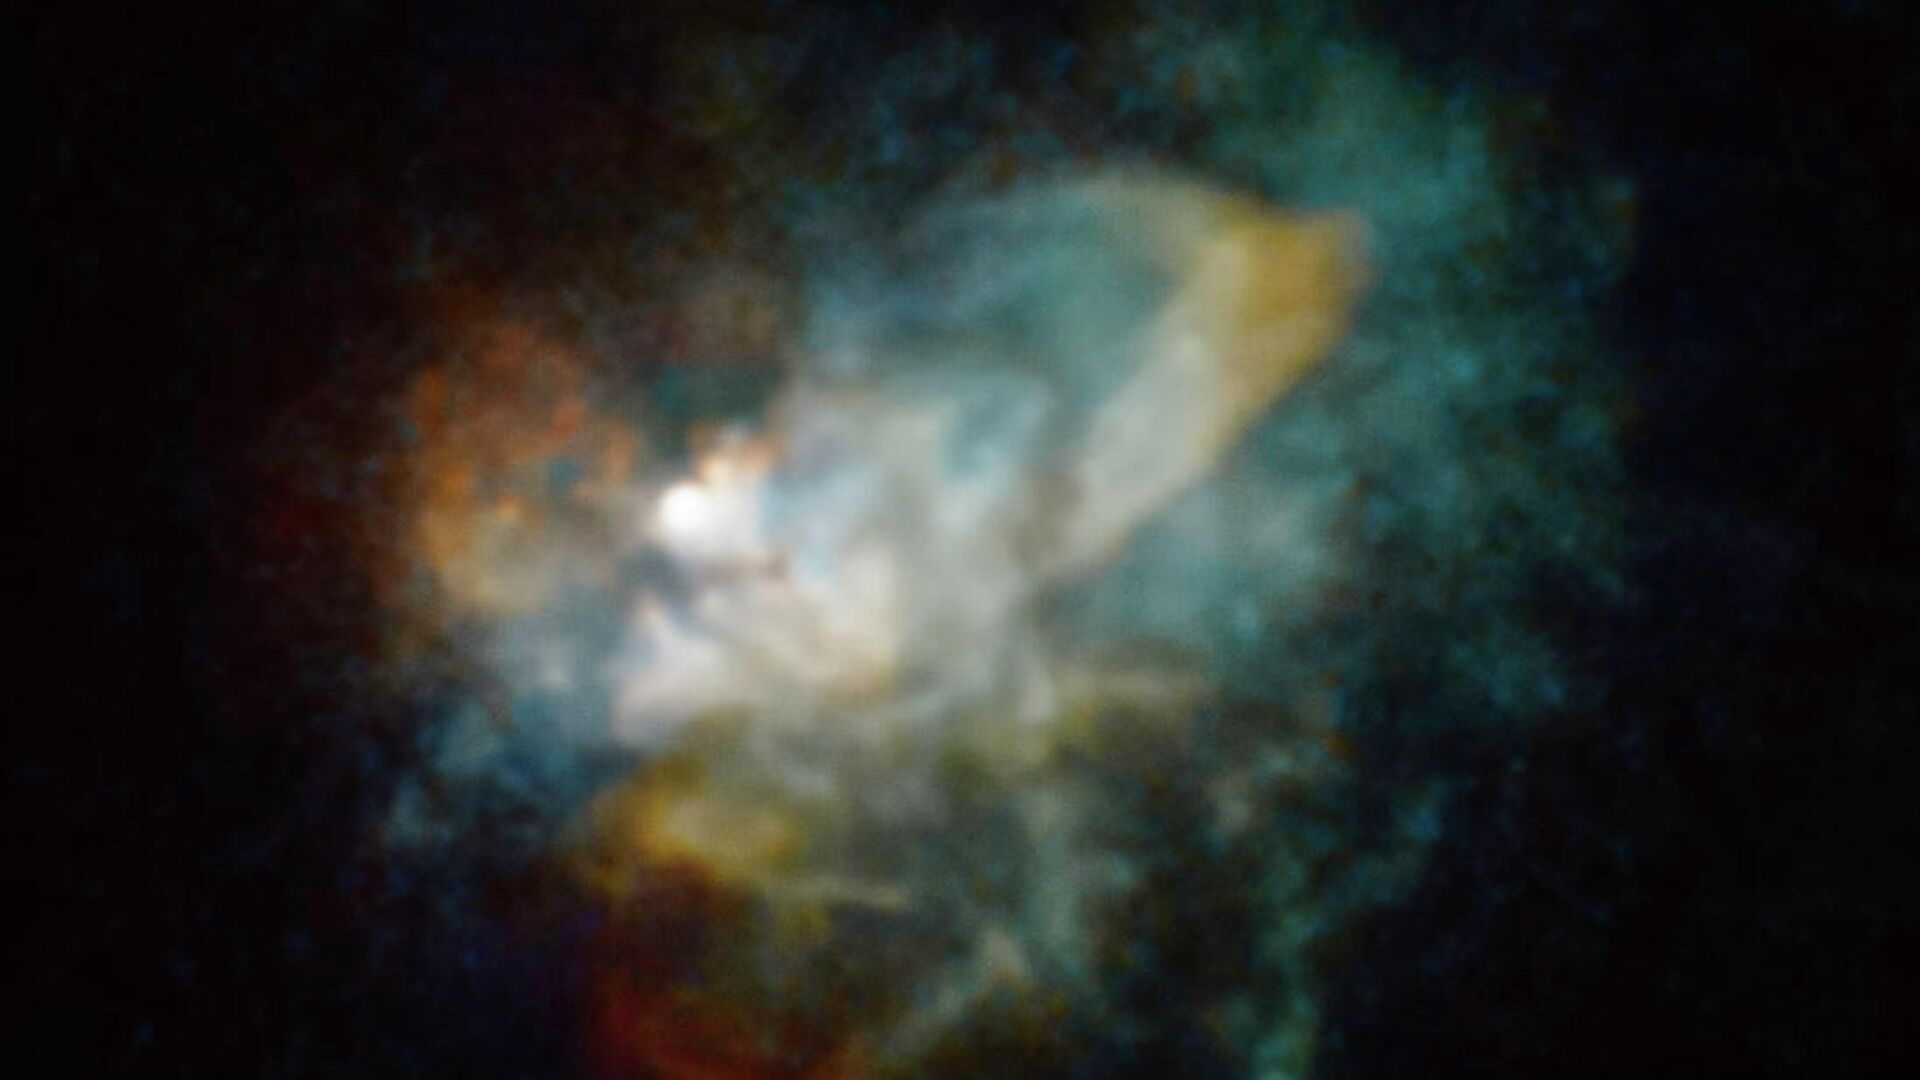 A giant nebula thrown out by star VY Canis Major - news from Russia today